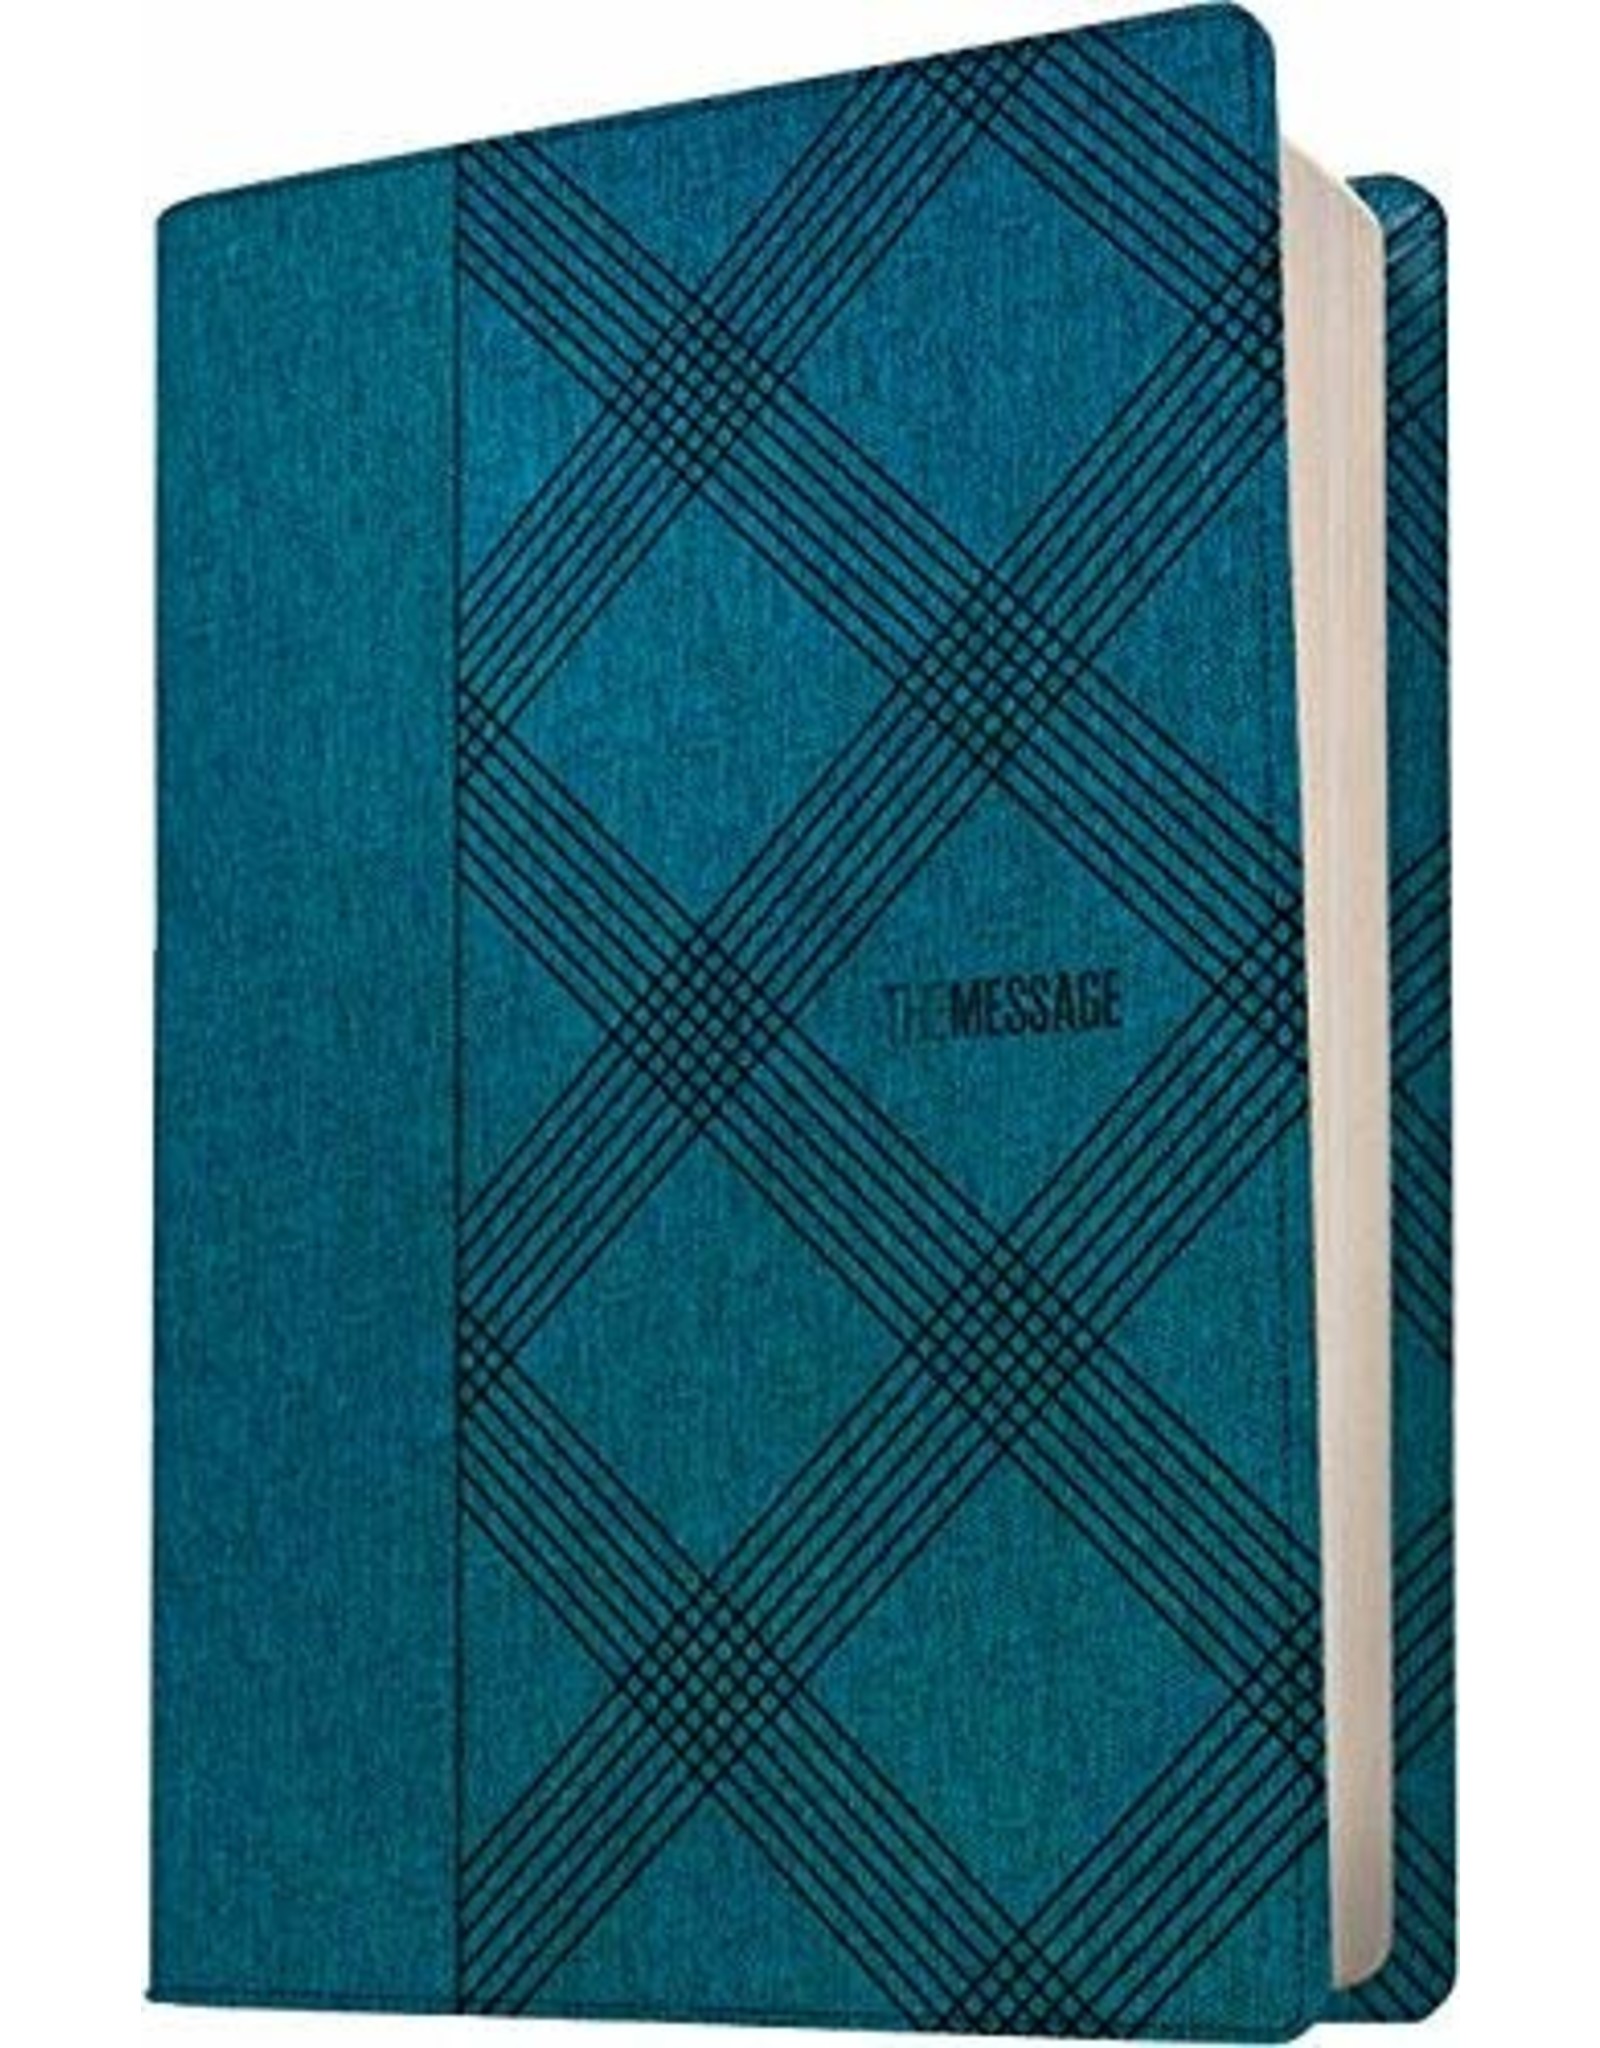 The Message Deluxe Gift Bible: The Bible in Contemporary Language-Cross Hatch Denim Leather Look